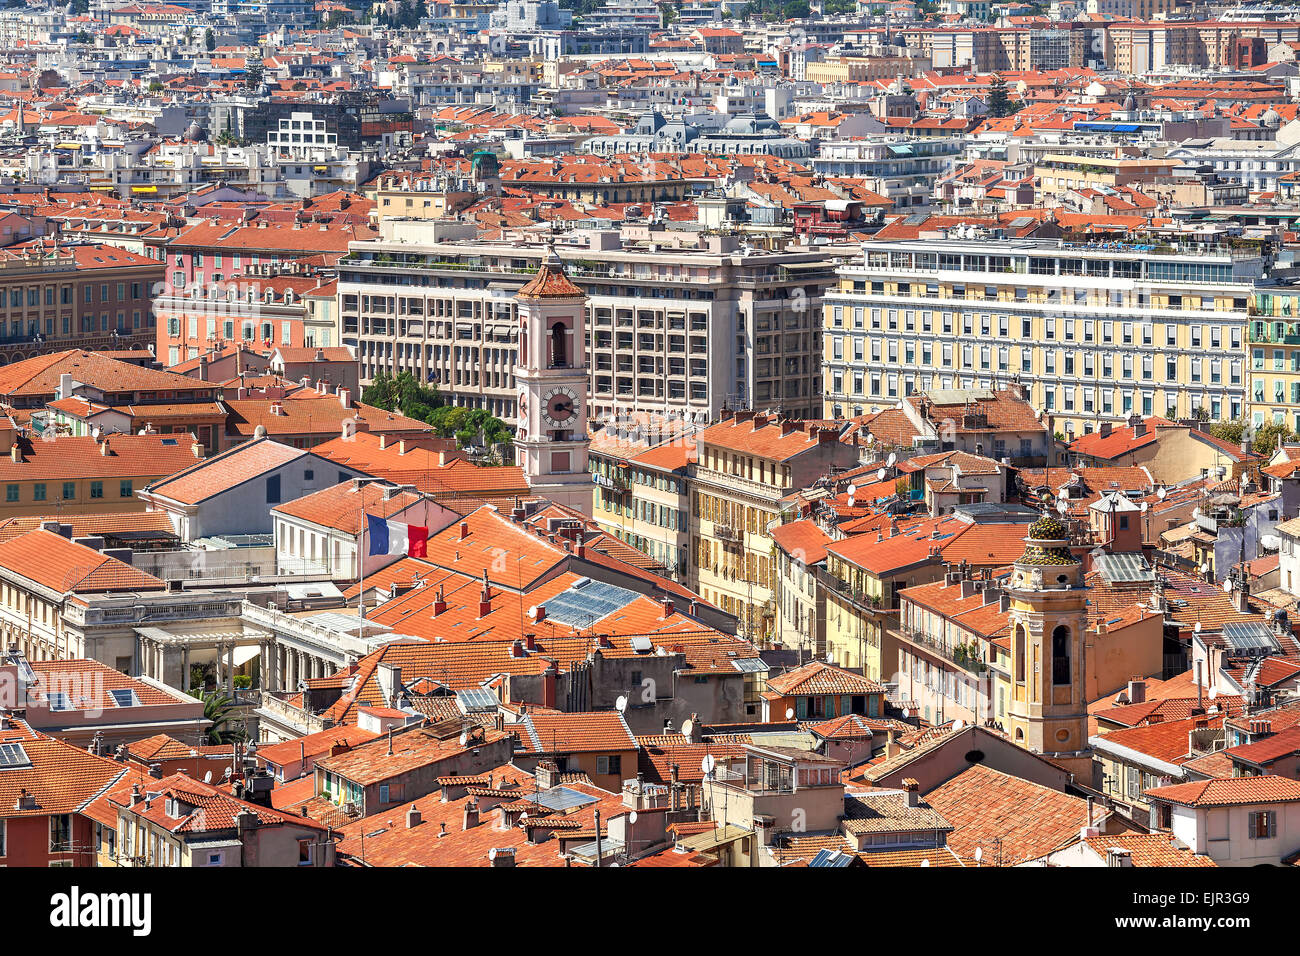 Red roofs and typical building of Nice, France (view from above). Stock Photo